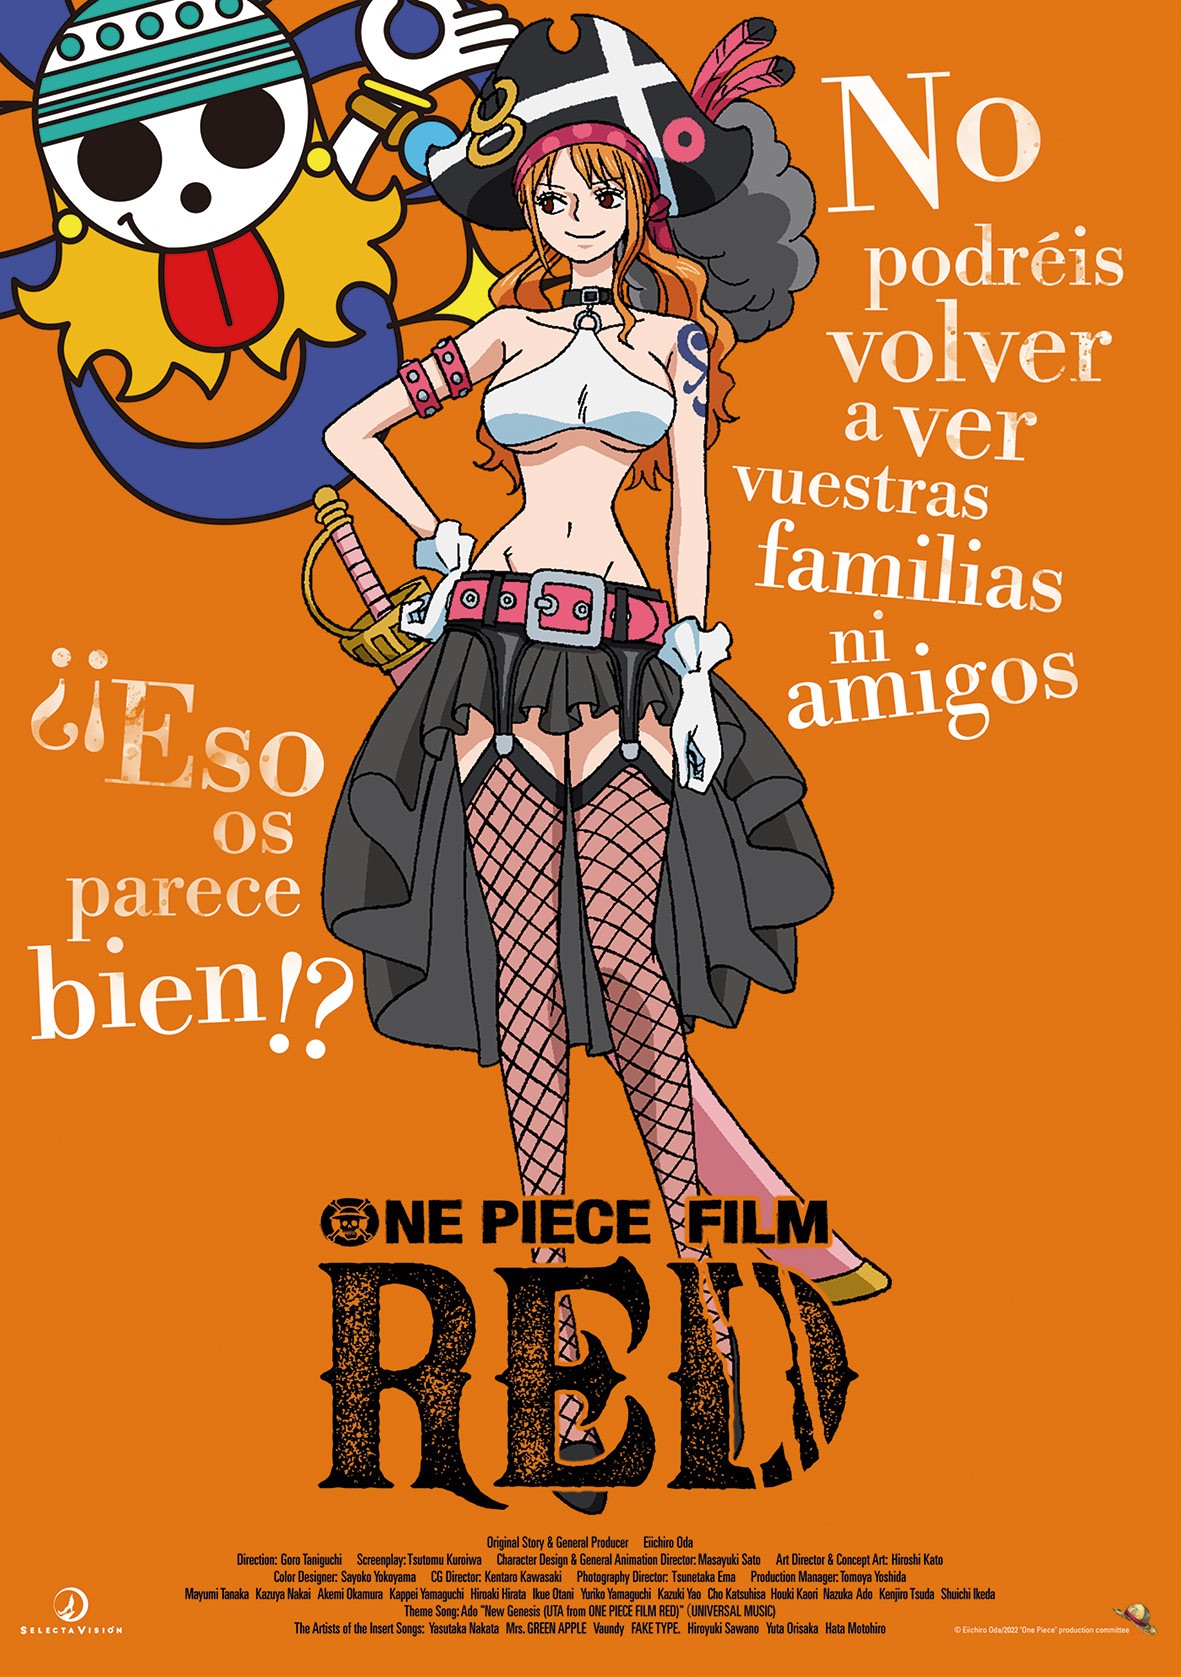 Nami Póster Personajes One Piece Film Red